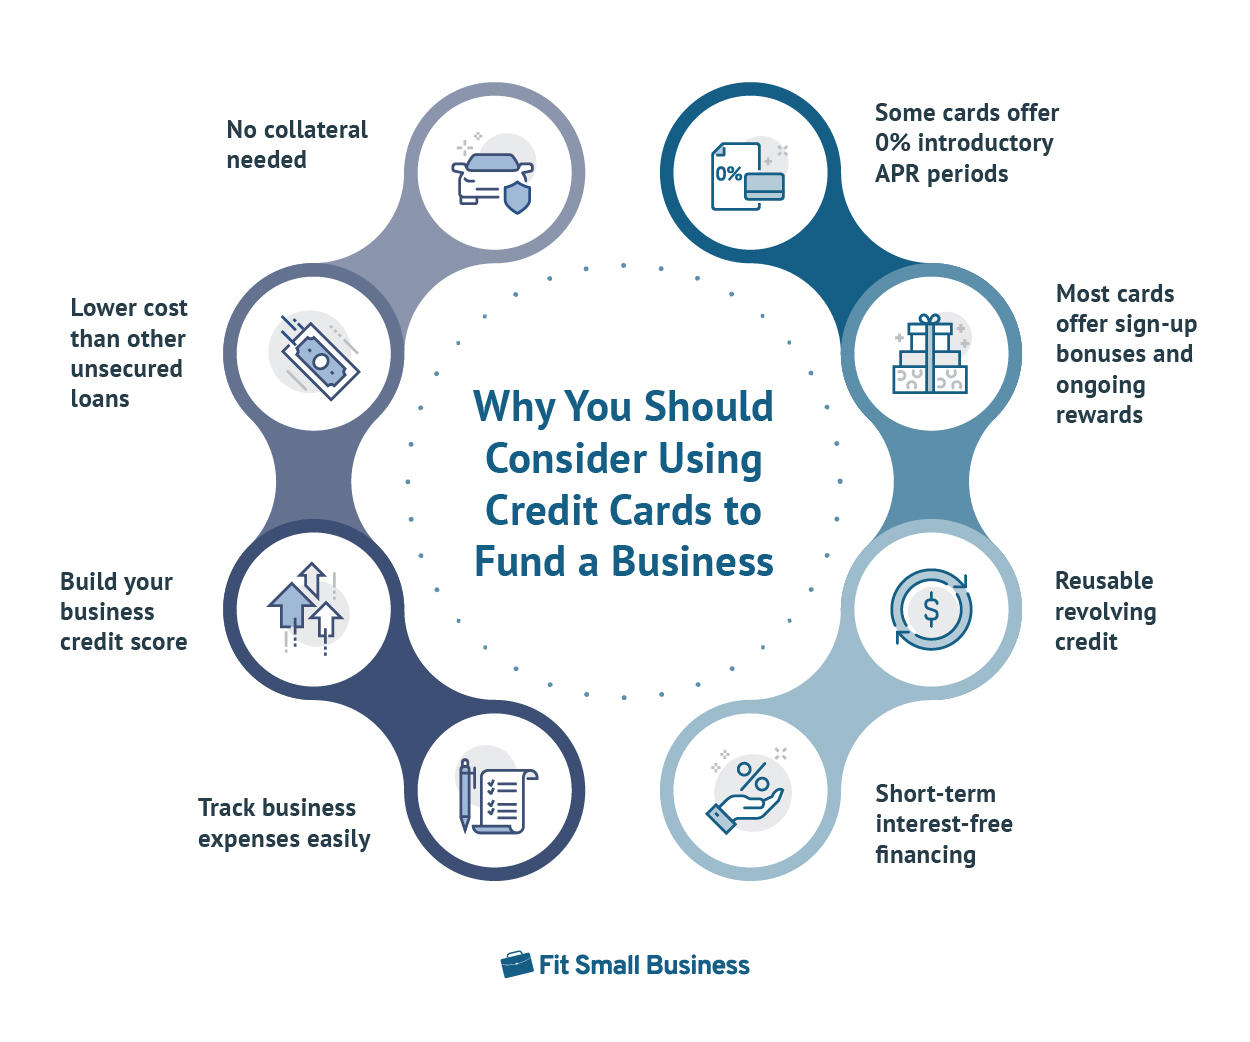 Why You Should Consider Using Credit Cards to Fund a Business